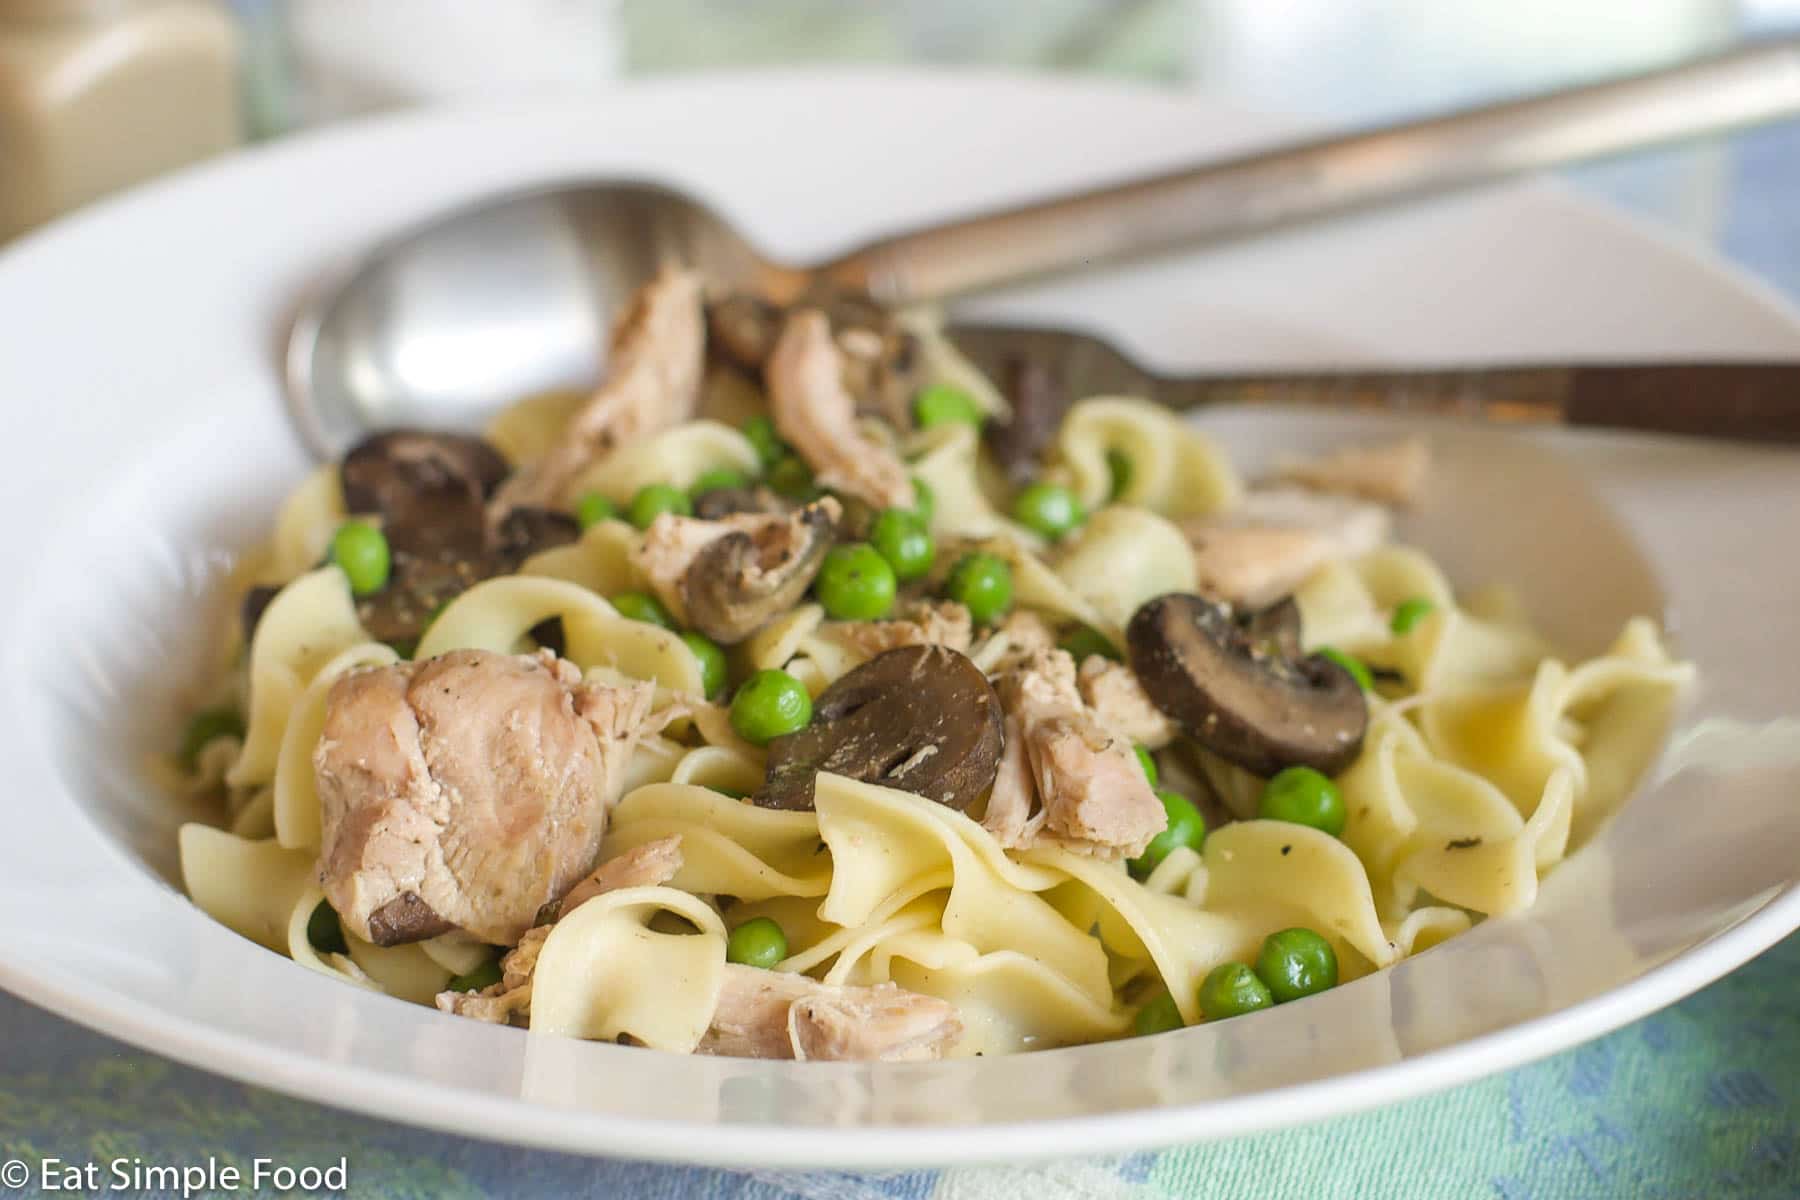 White Shallow bowl of cooked shredded chicken, green sweet peas, curly egg noodles and sliced mushrooms. Close up.